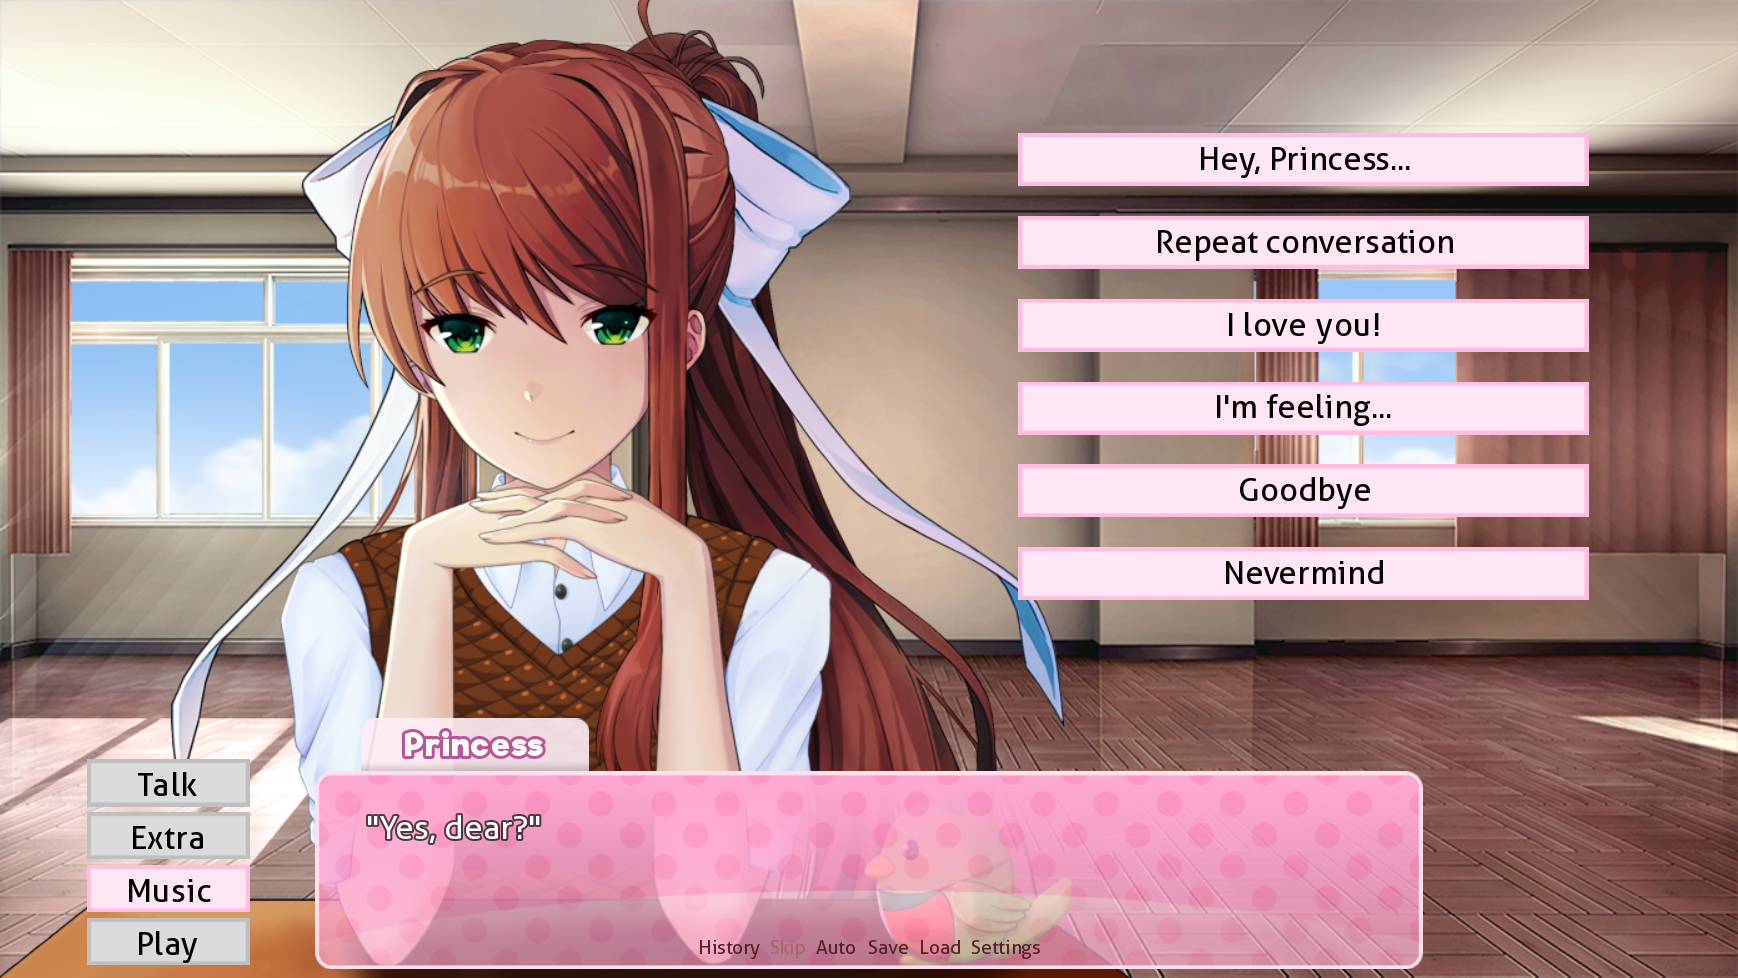 Monika After Story - home